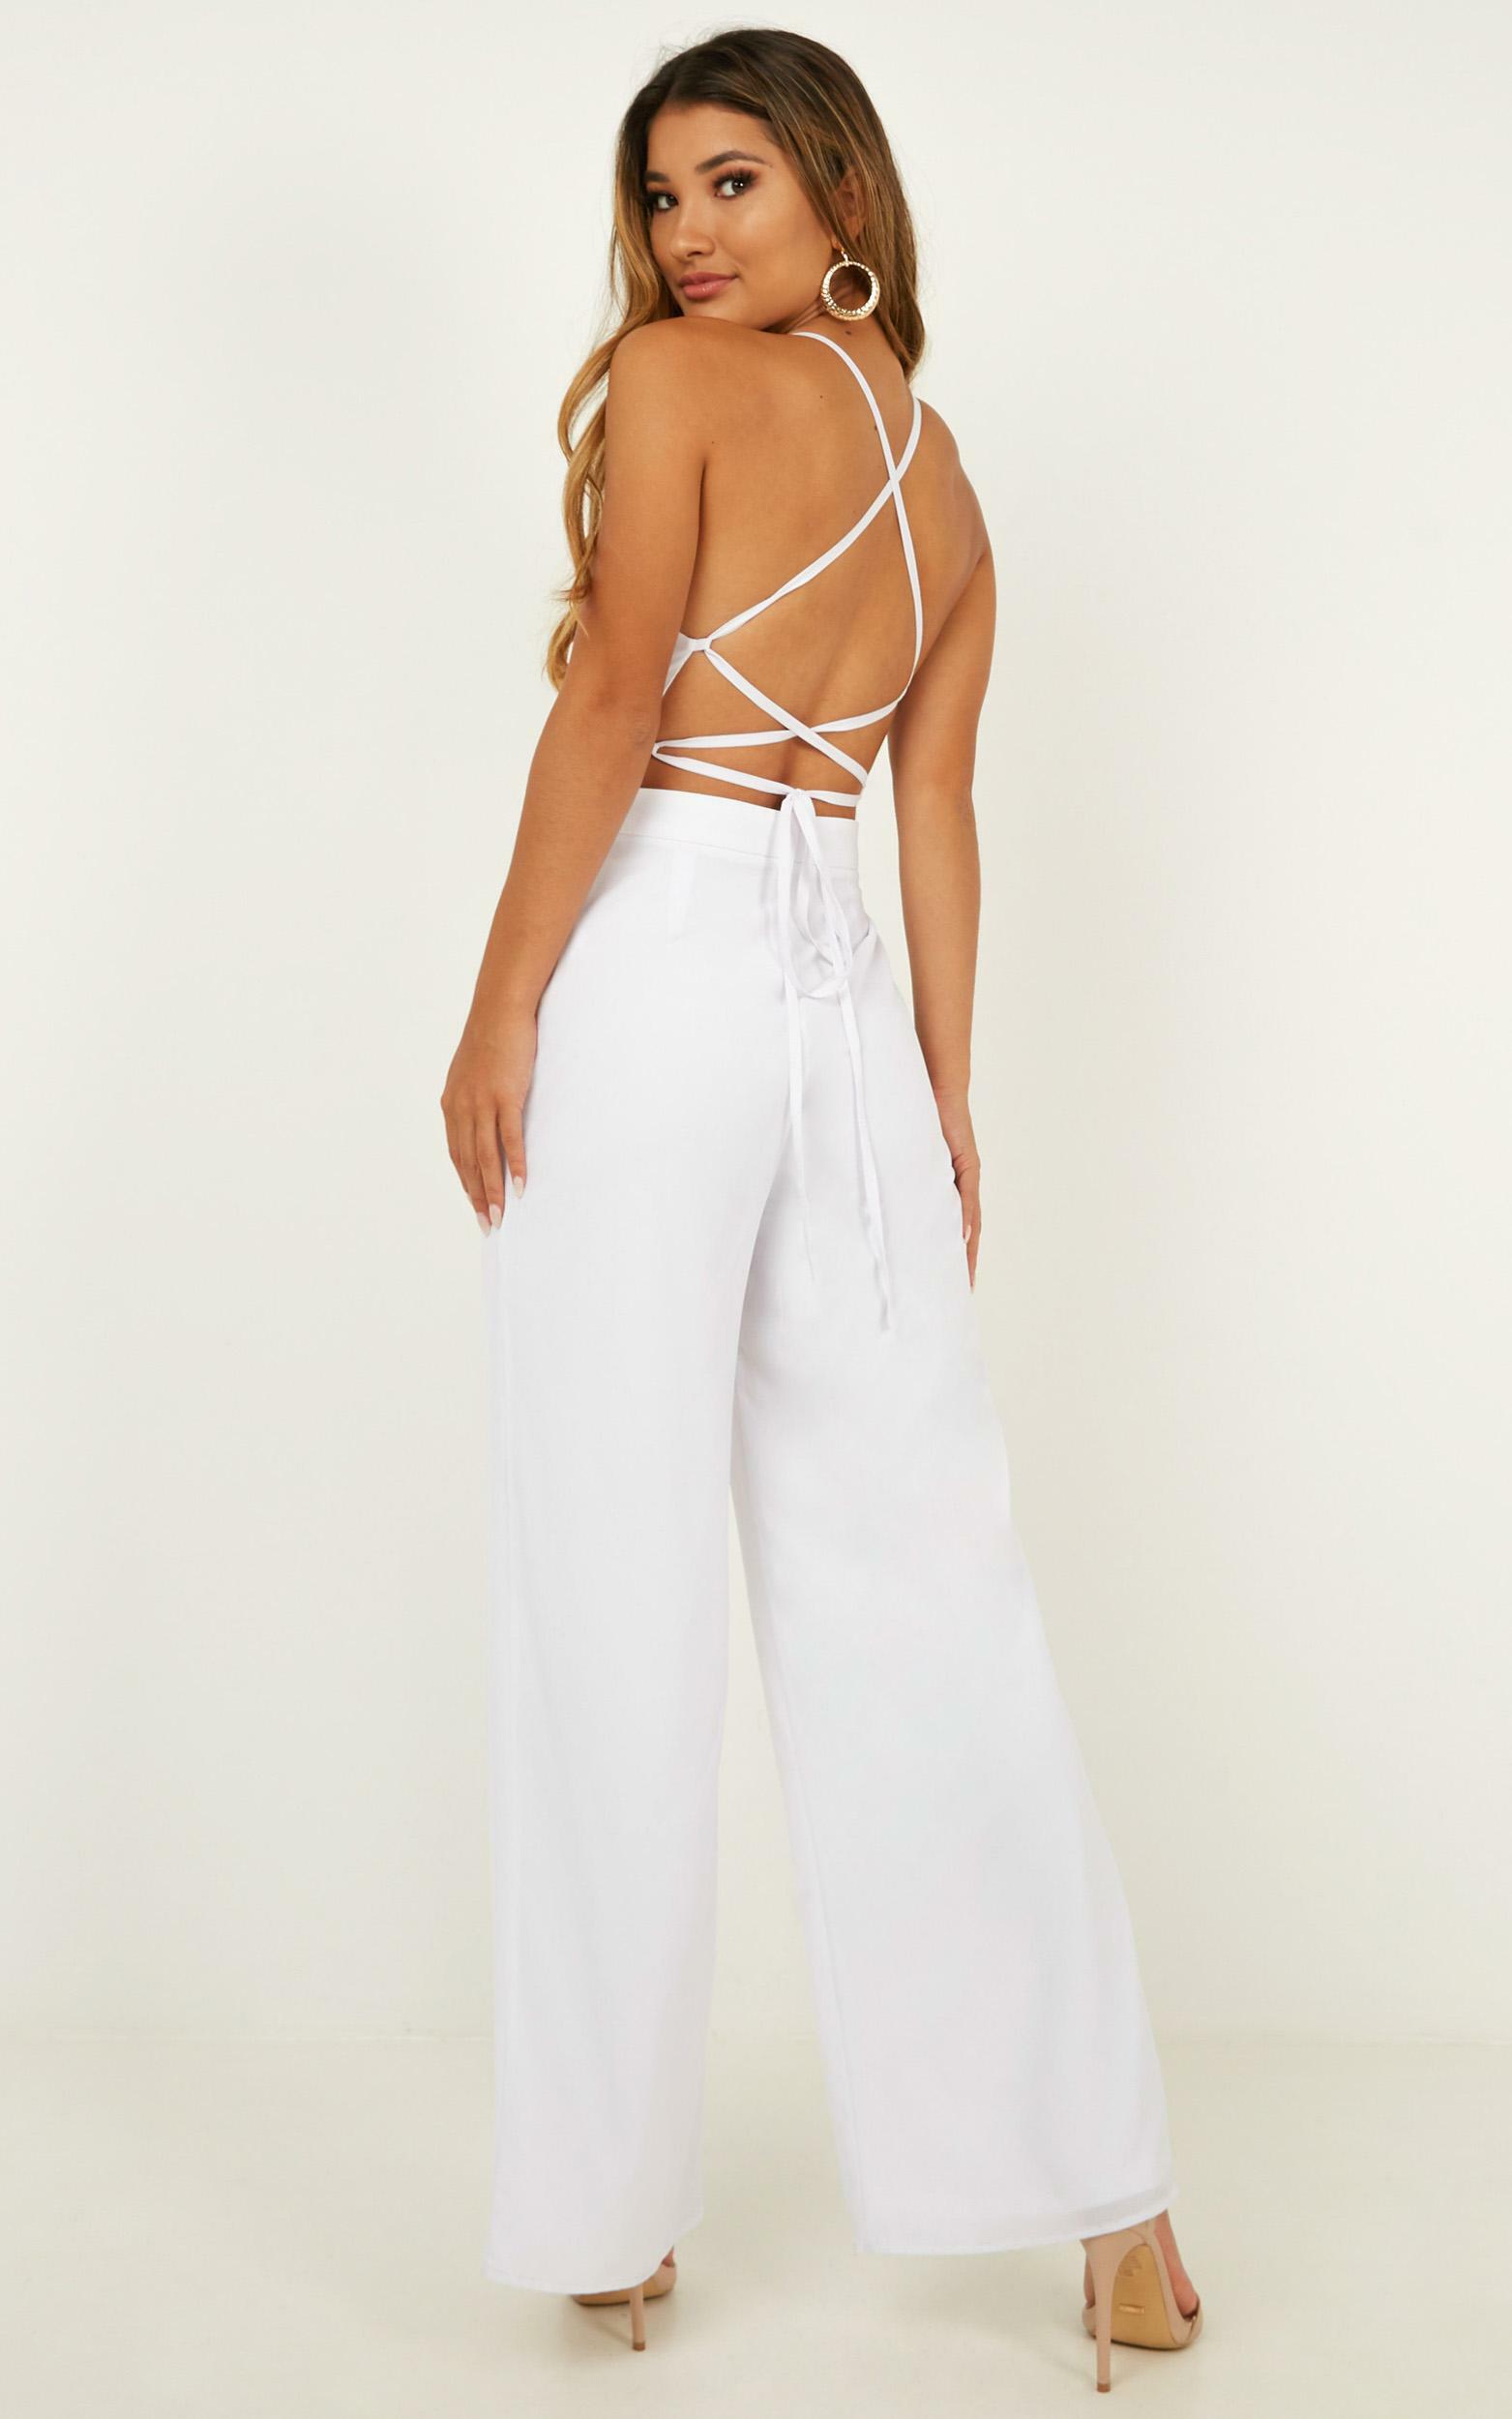 Dream Of Jumpsuit in White - 06, WHT5, hi-res image number null